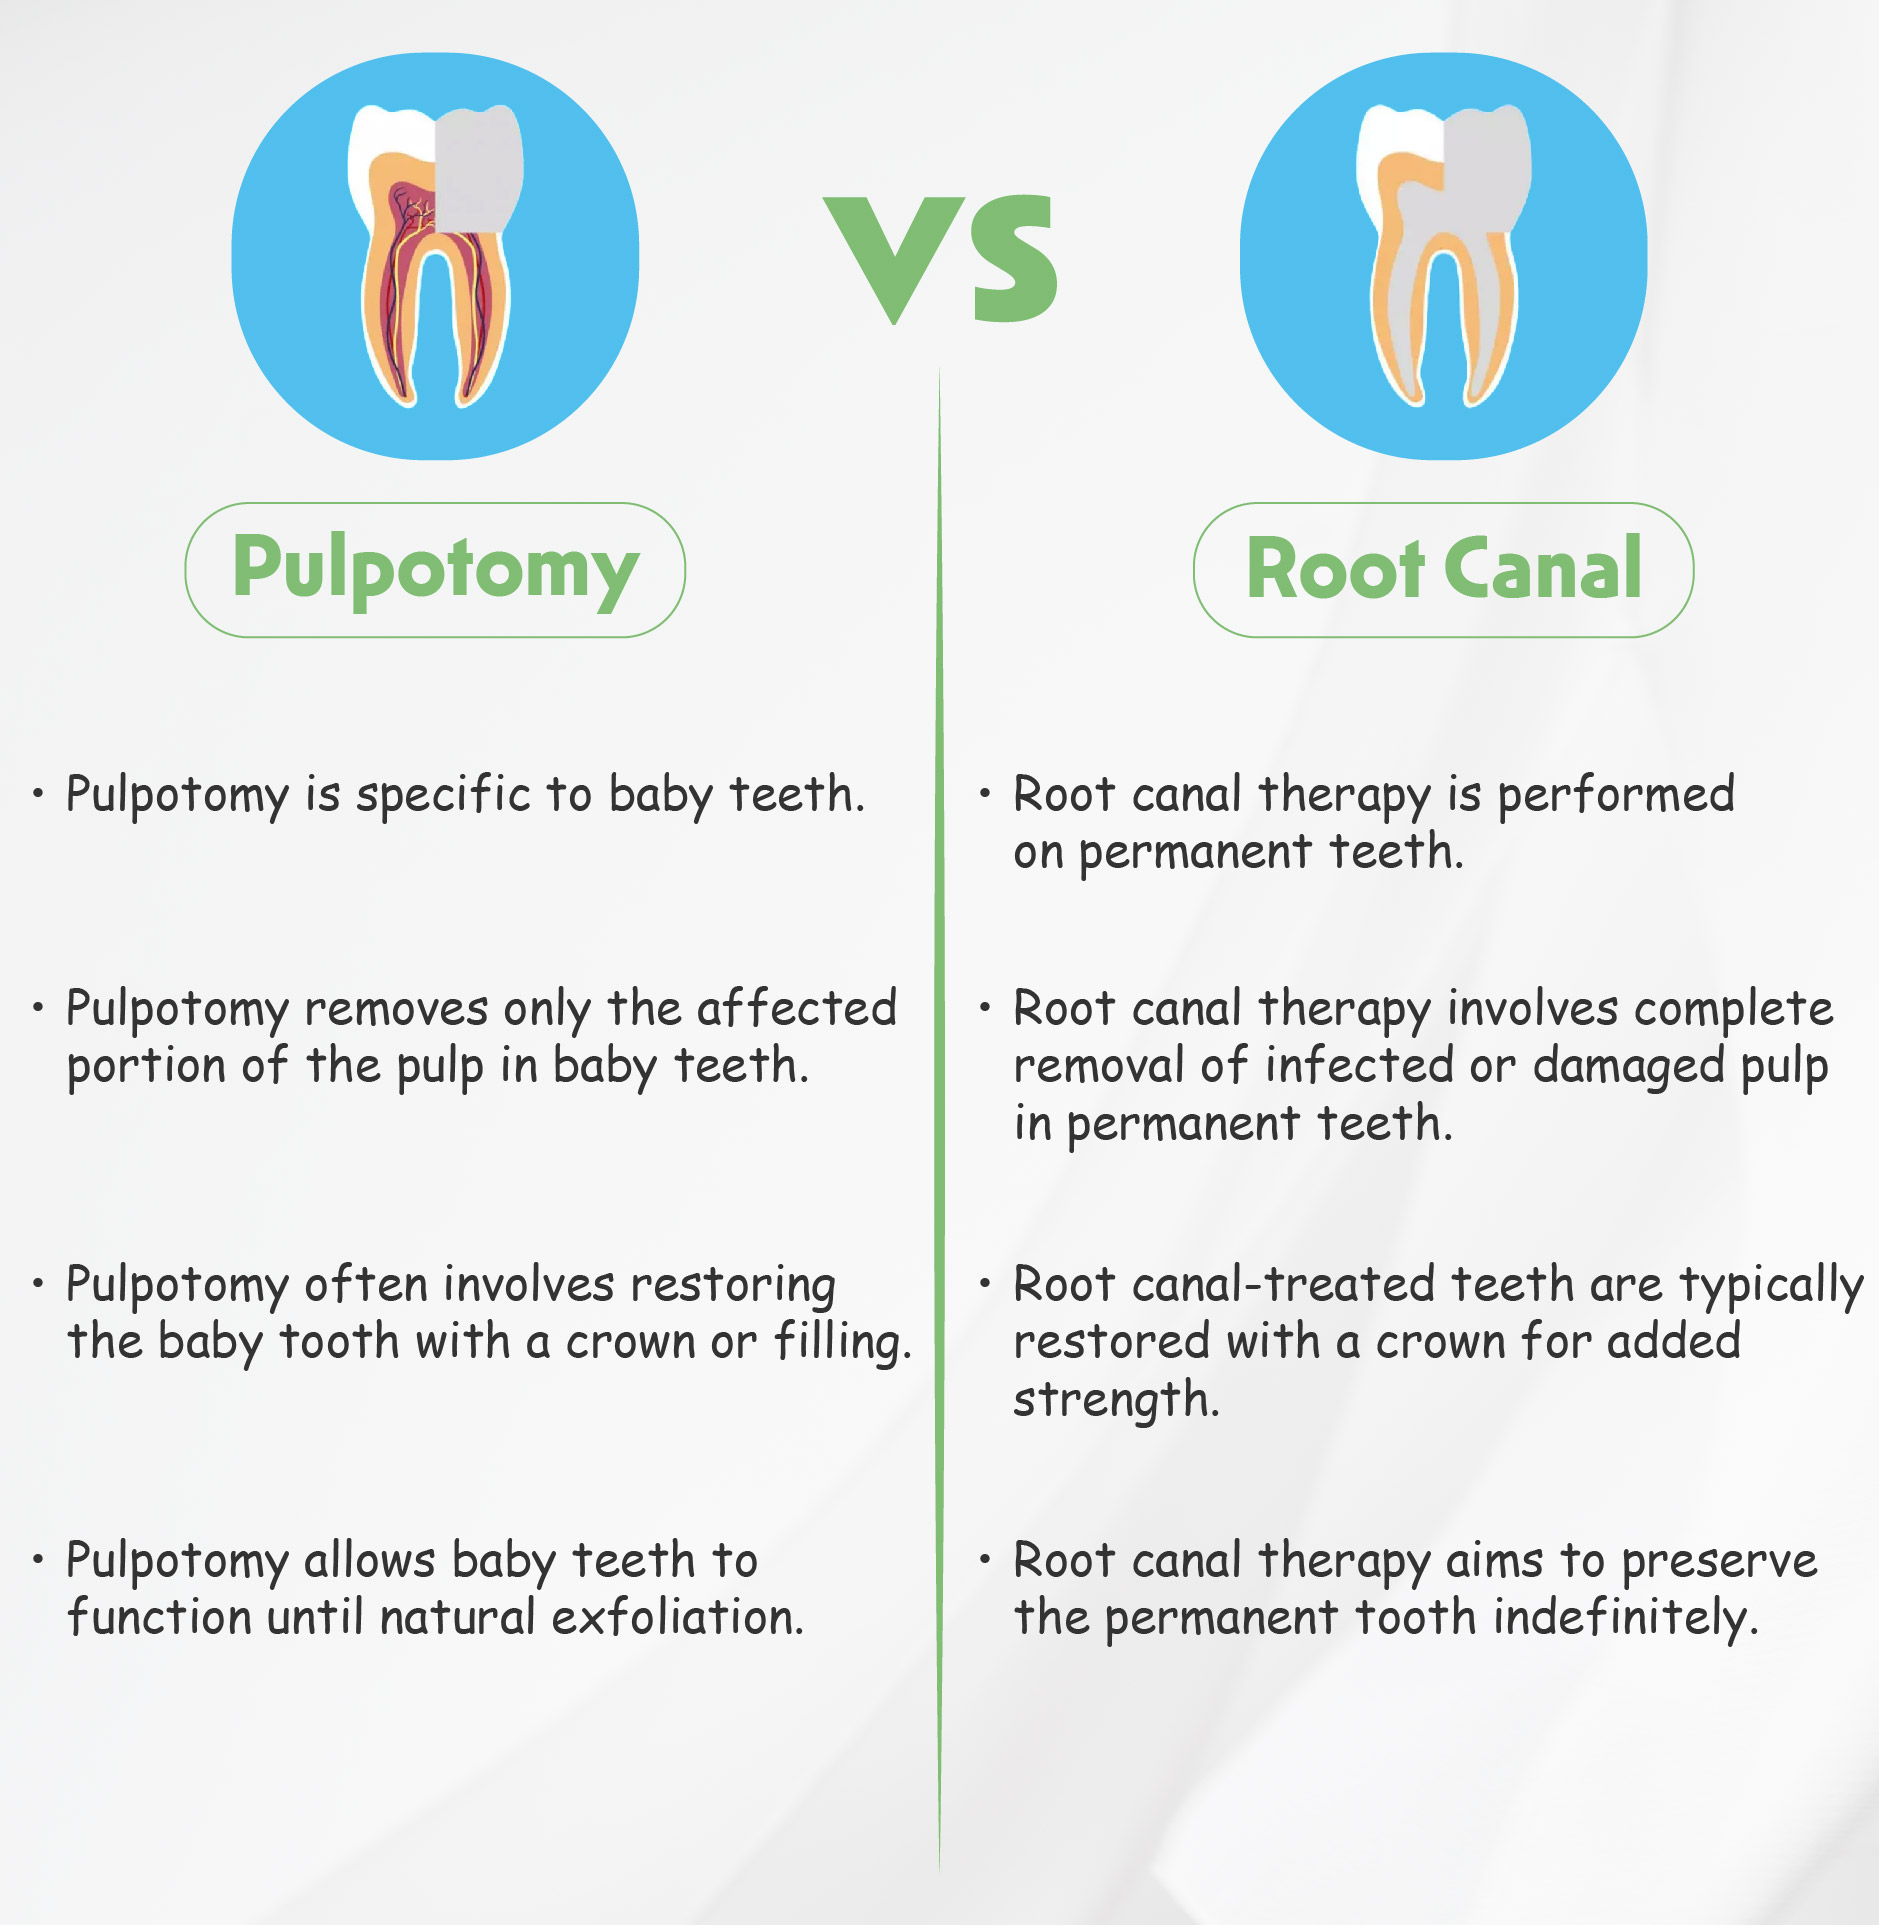 Difference Between Pulpotomy vs Root Canal